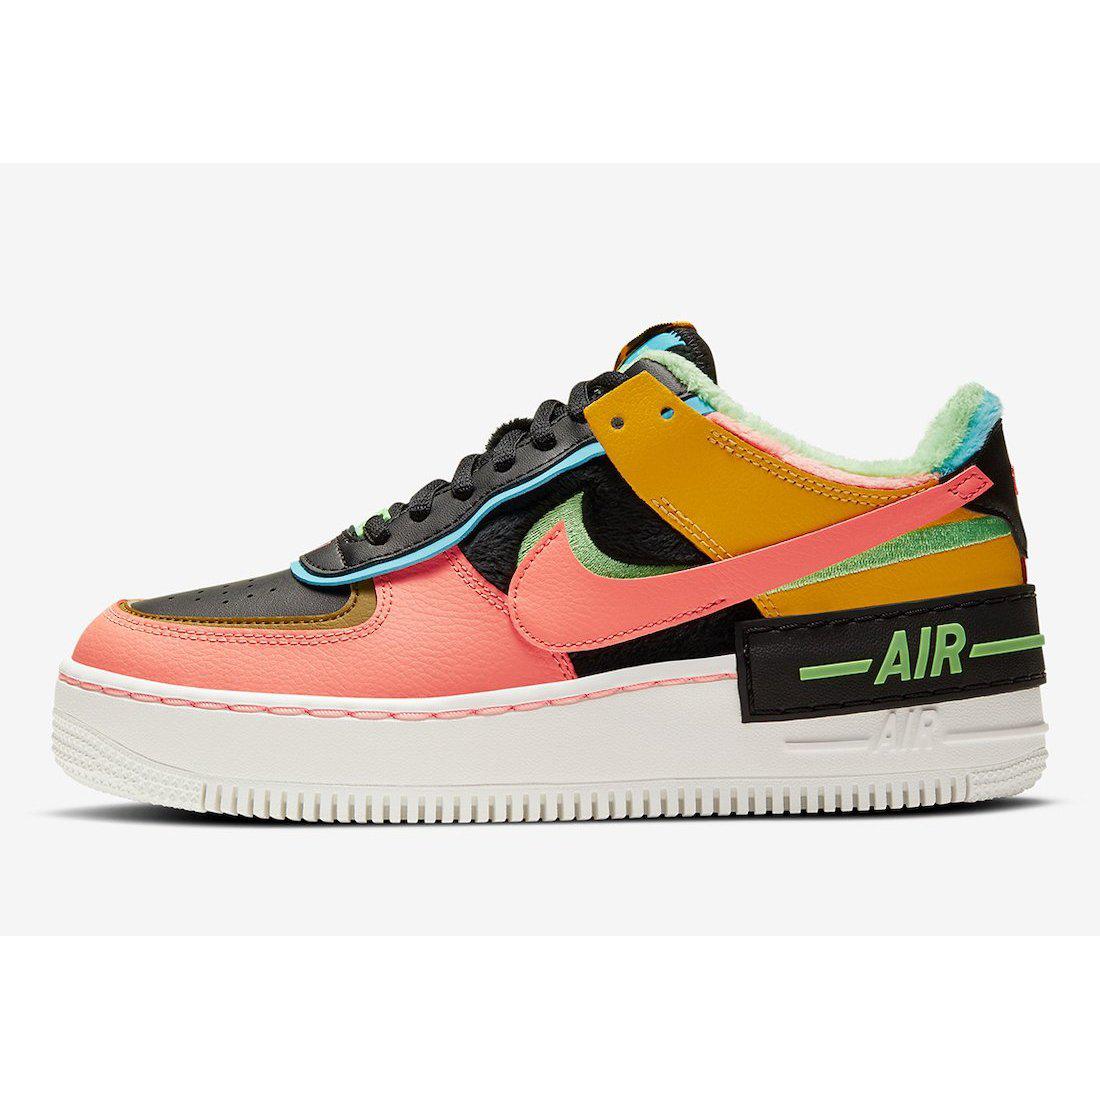 nike wmns air force 1 shadow white atomic pink